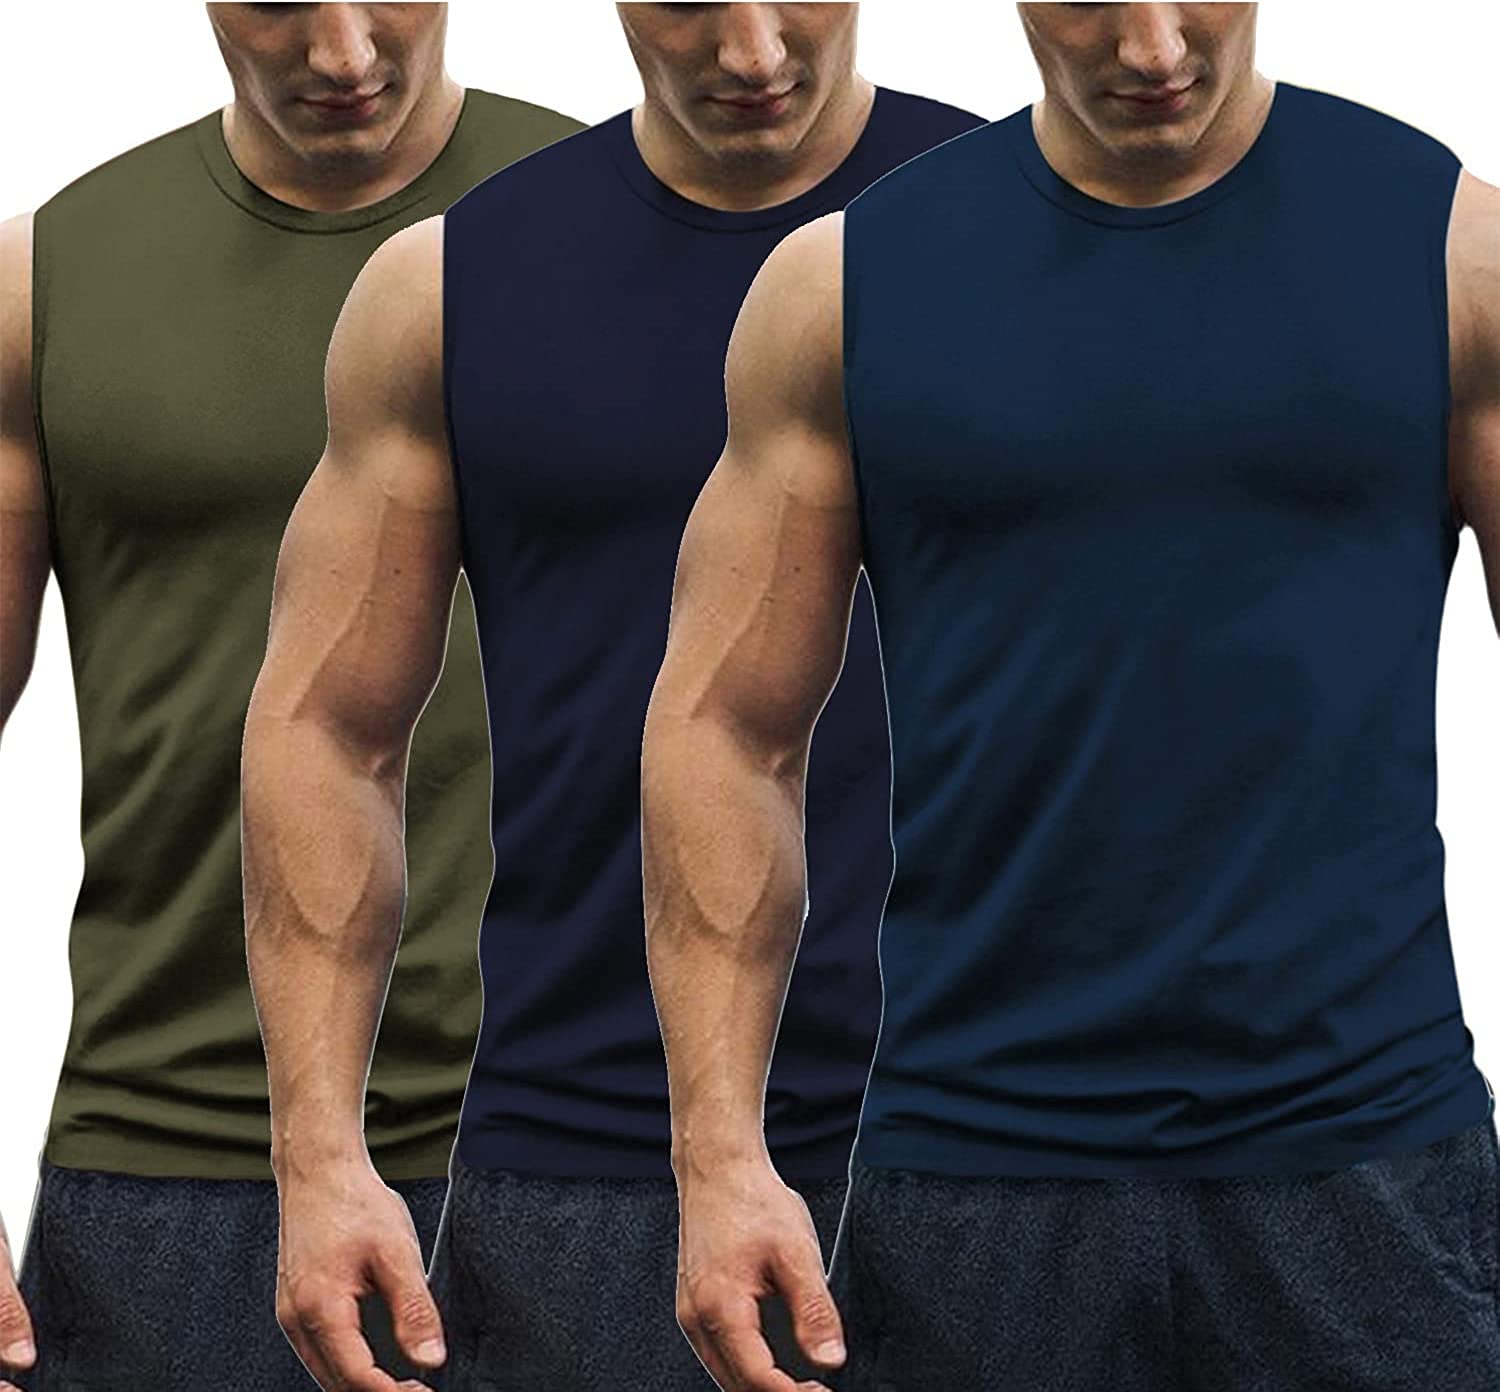 COOFANDY Mens 3 Pack Workout Tank Tops Quick Dry Sleeveless Gym Shirts Bodybuilding Fitness Muscle Tee Shirts 